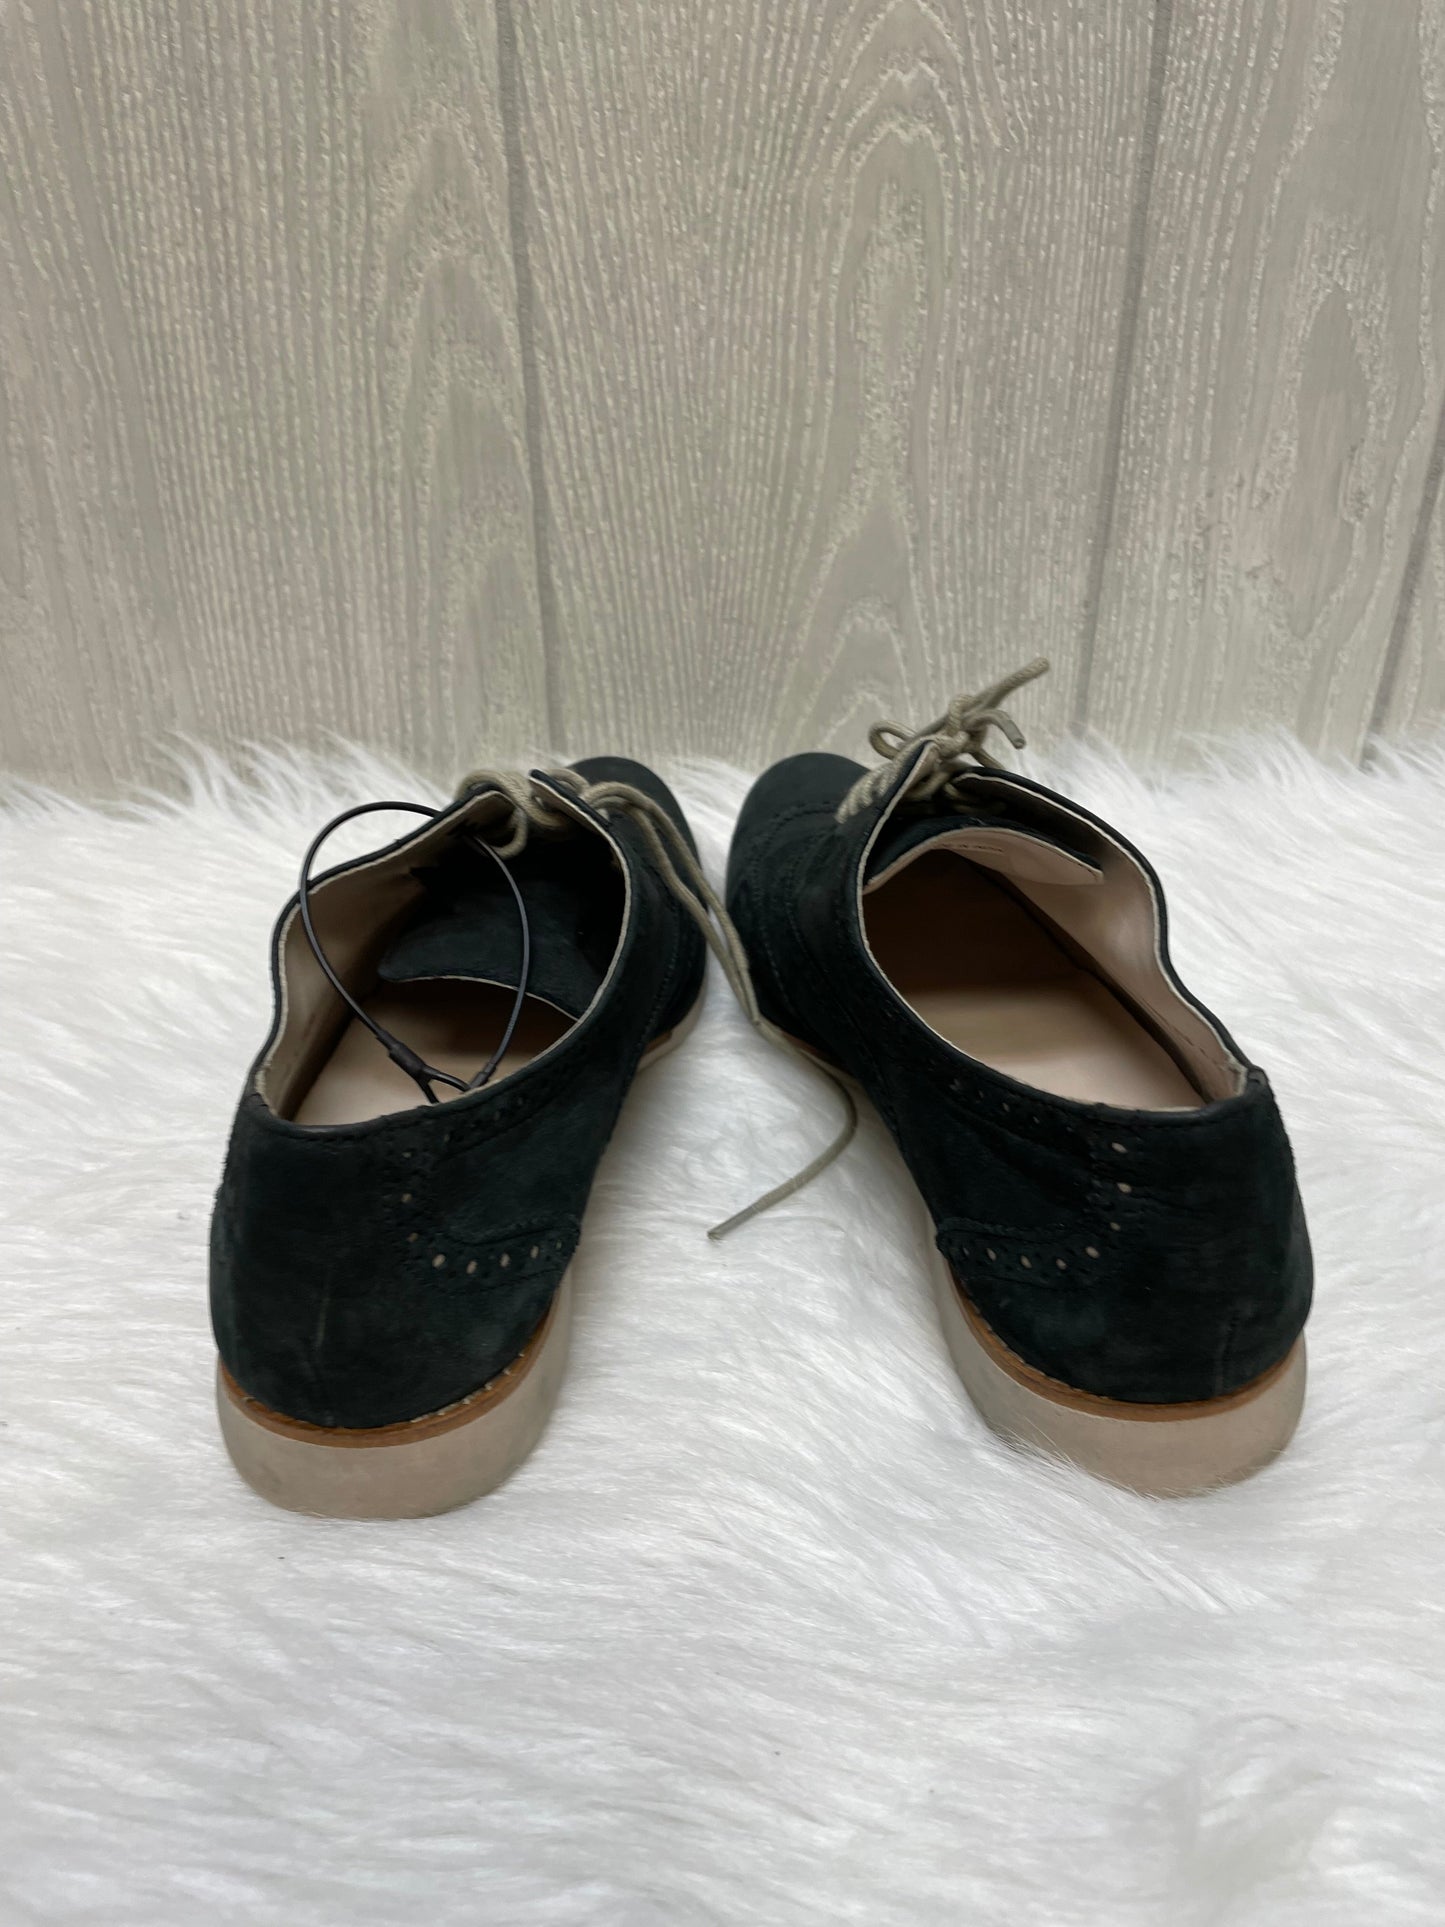 Navy Shoes Flats Cole-haan, Size 8.5